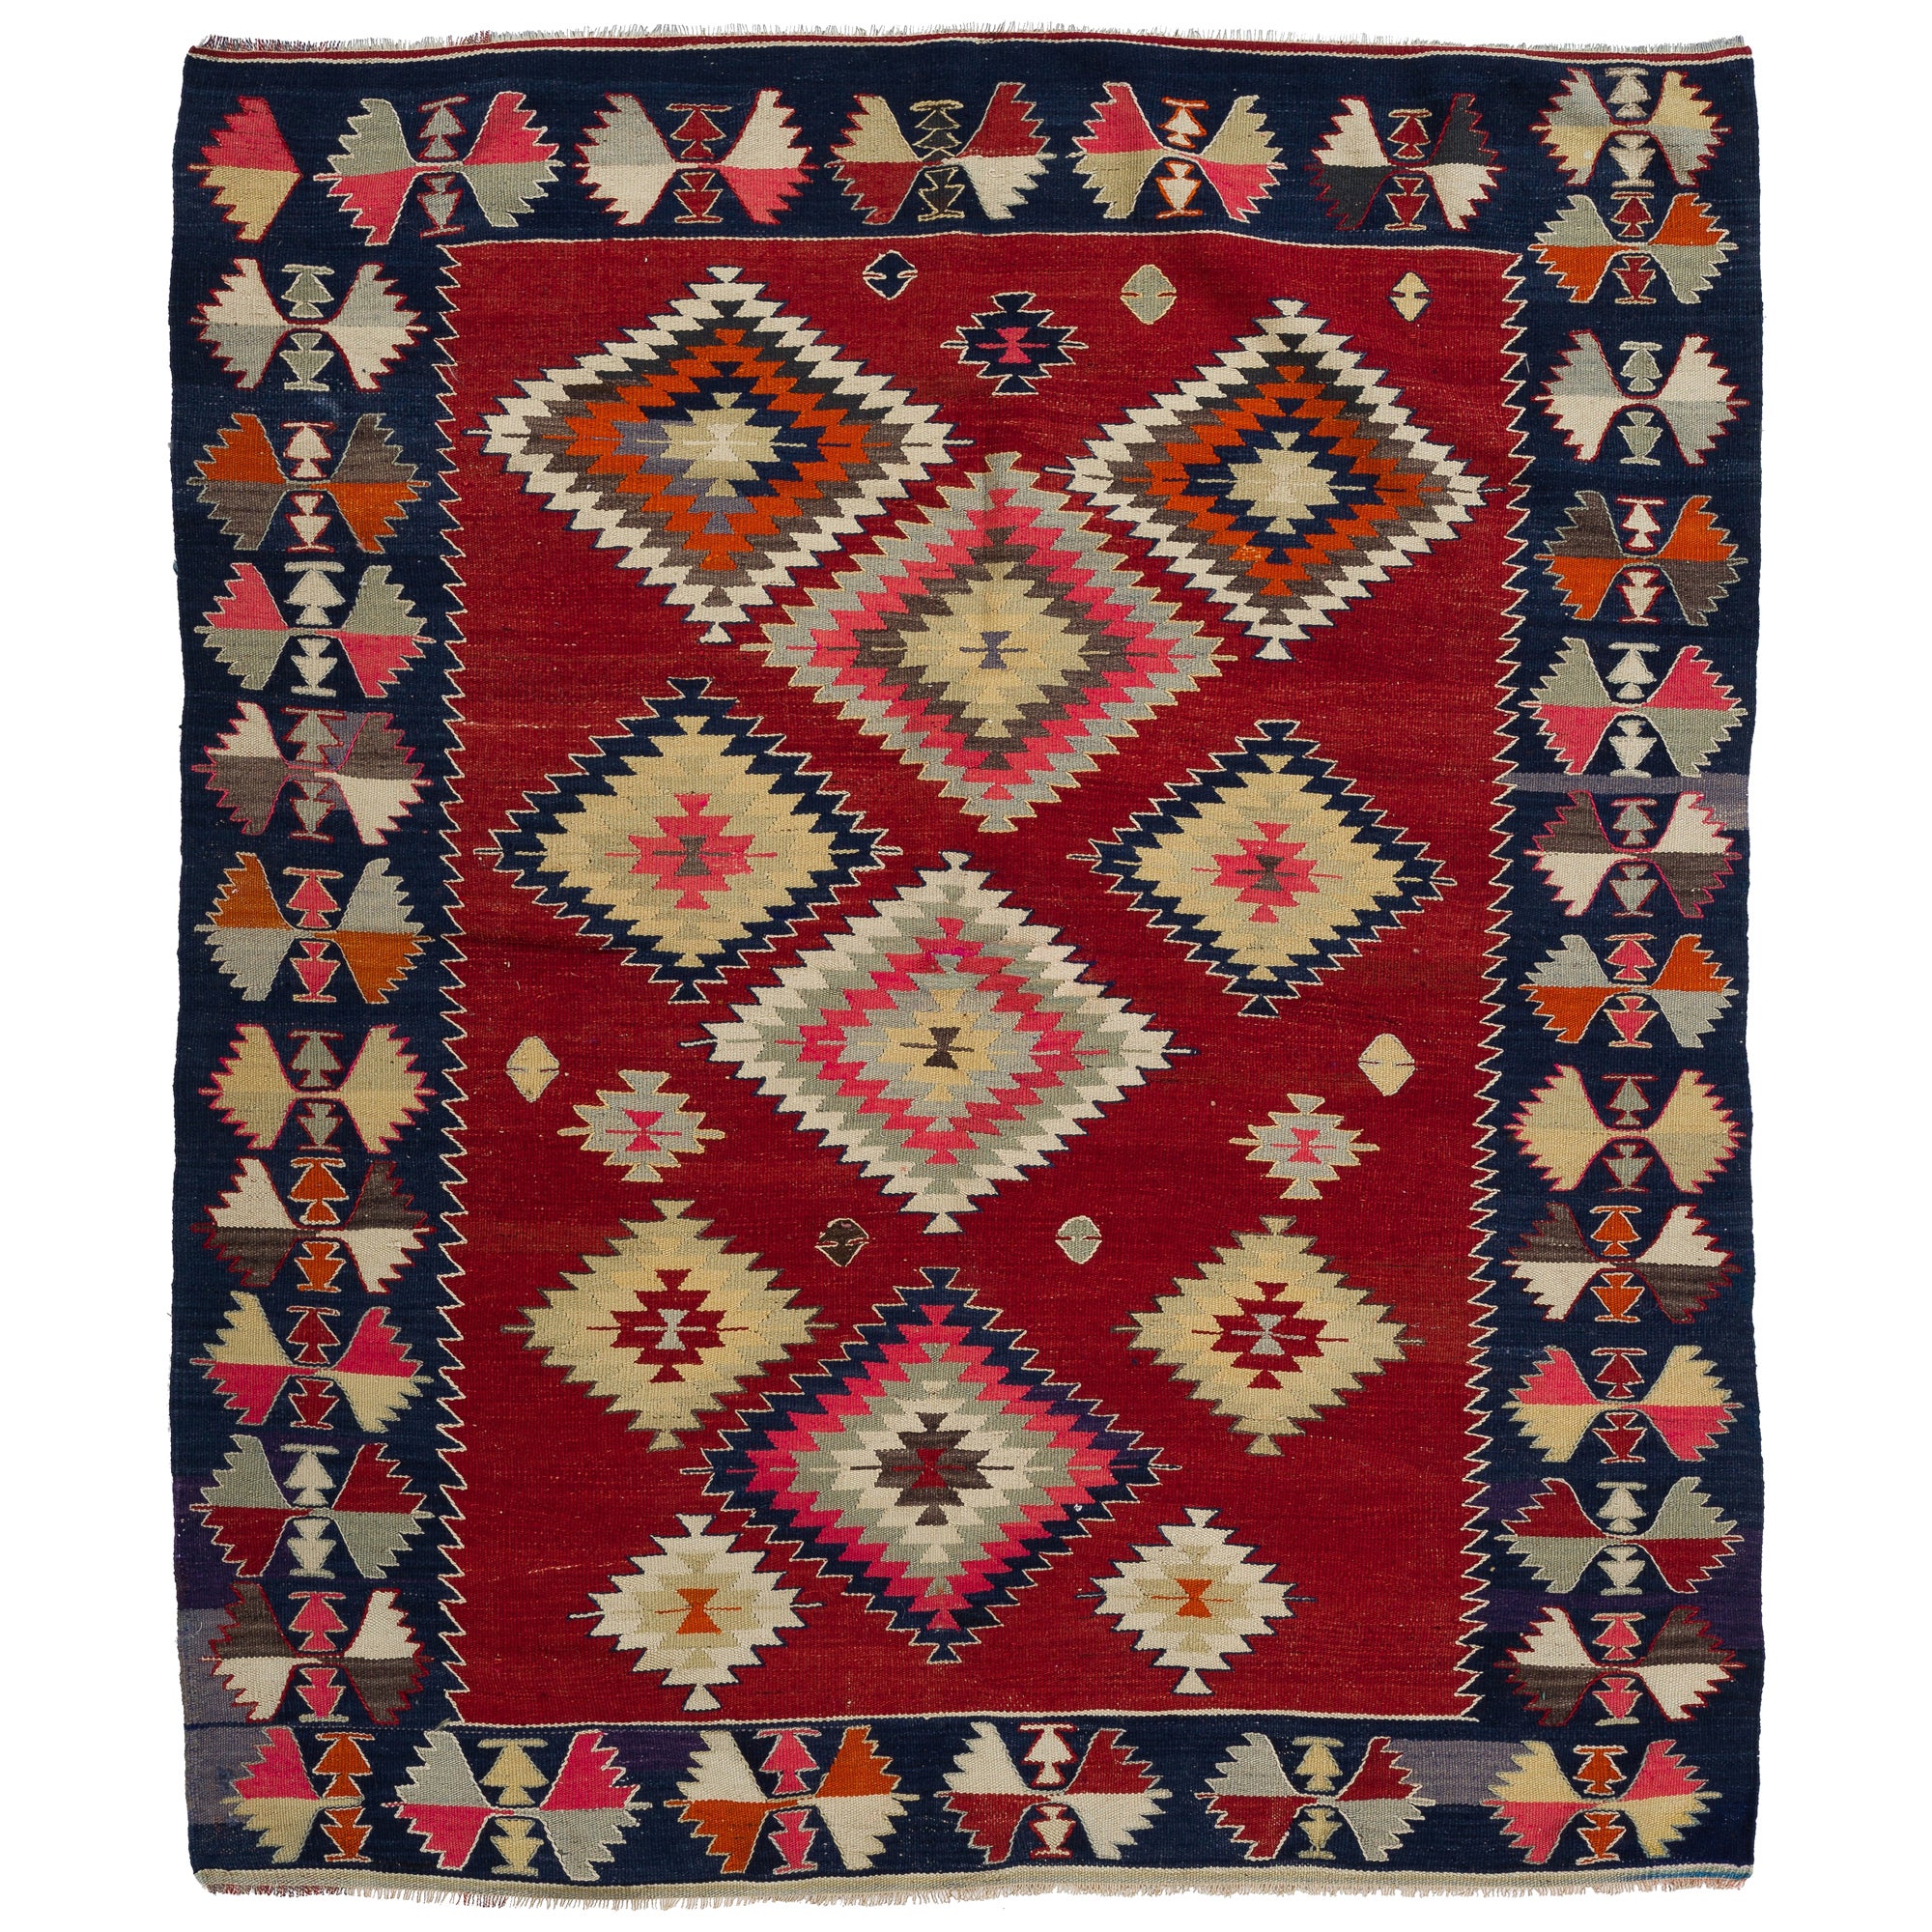 5.8x6.8 Ft Vintage Anatolian Kilim Rug in Red with Geometric Design, 100% Wool For Sale